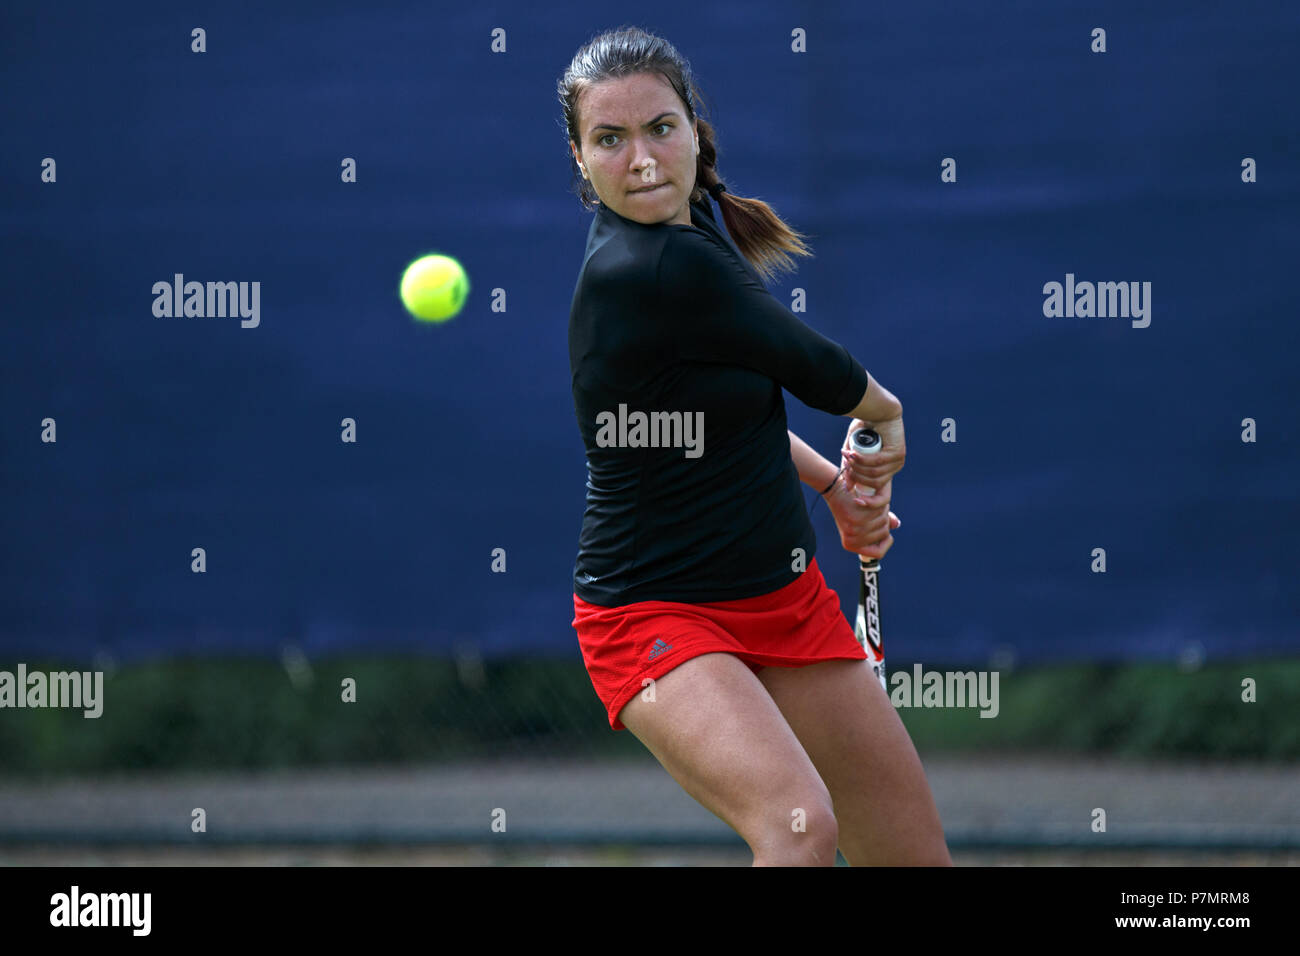 Elena-Gabriela Ruse, professional tennis player from Romania, plays a shot  during a match in 2018 Stock Photo - Alamy